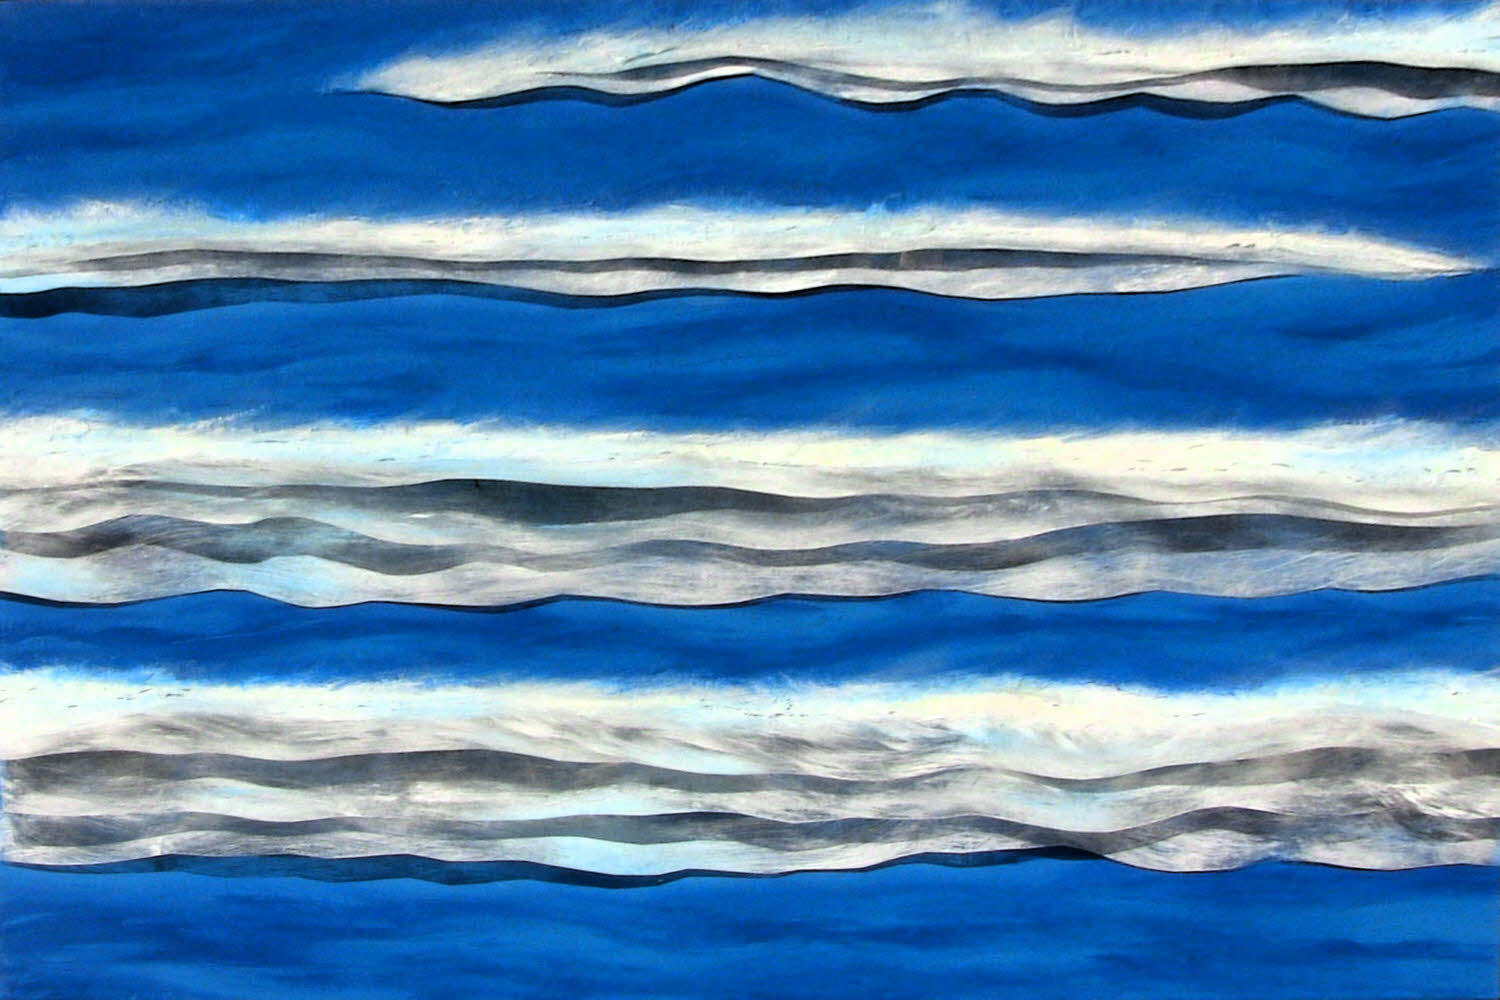 White and Blue Waves, 2012, mixed media on canvas, 24x36 inches